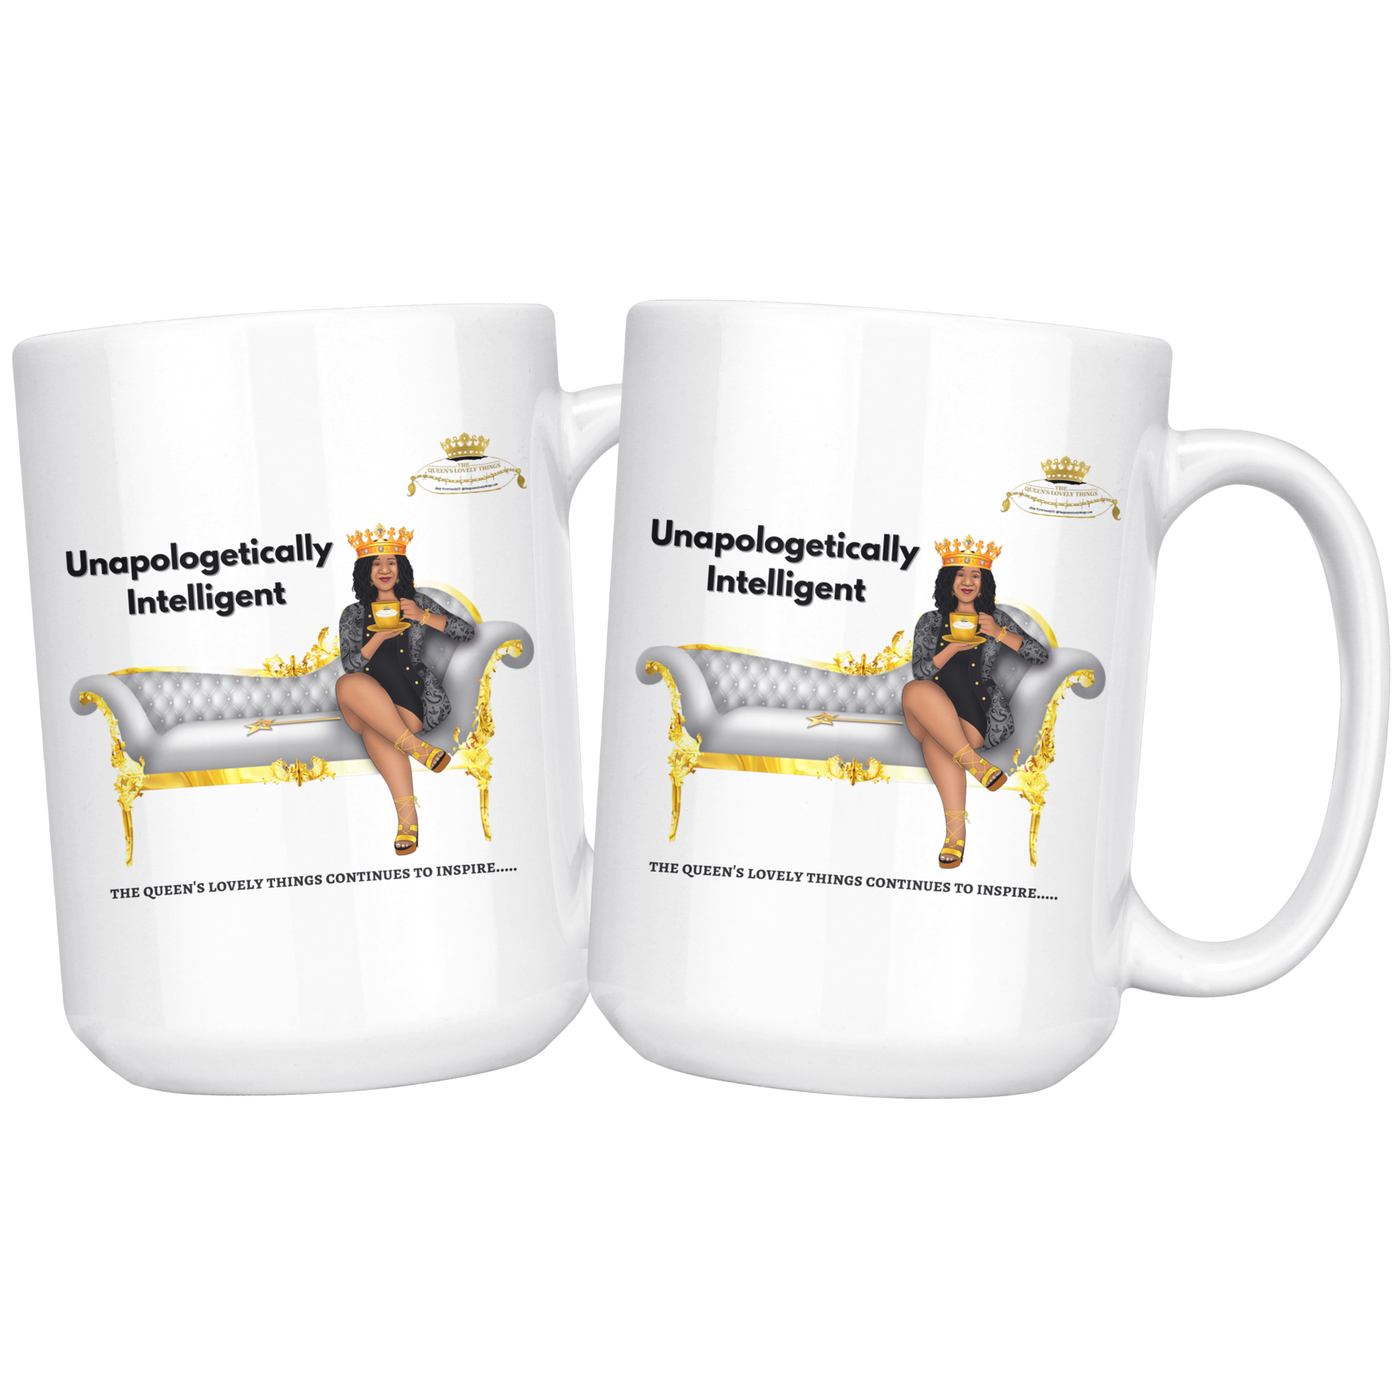 Queen's Collection White Coffee Tea Mug Unapologetically Intelligent